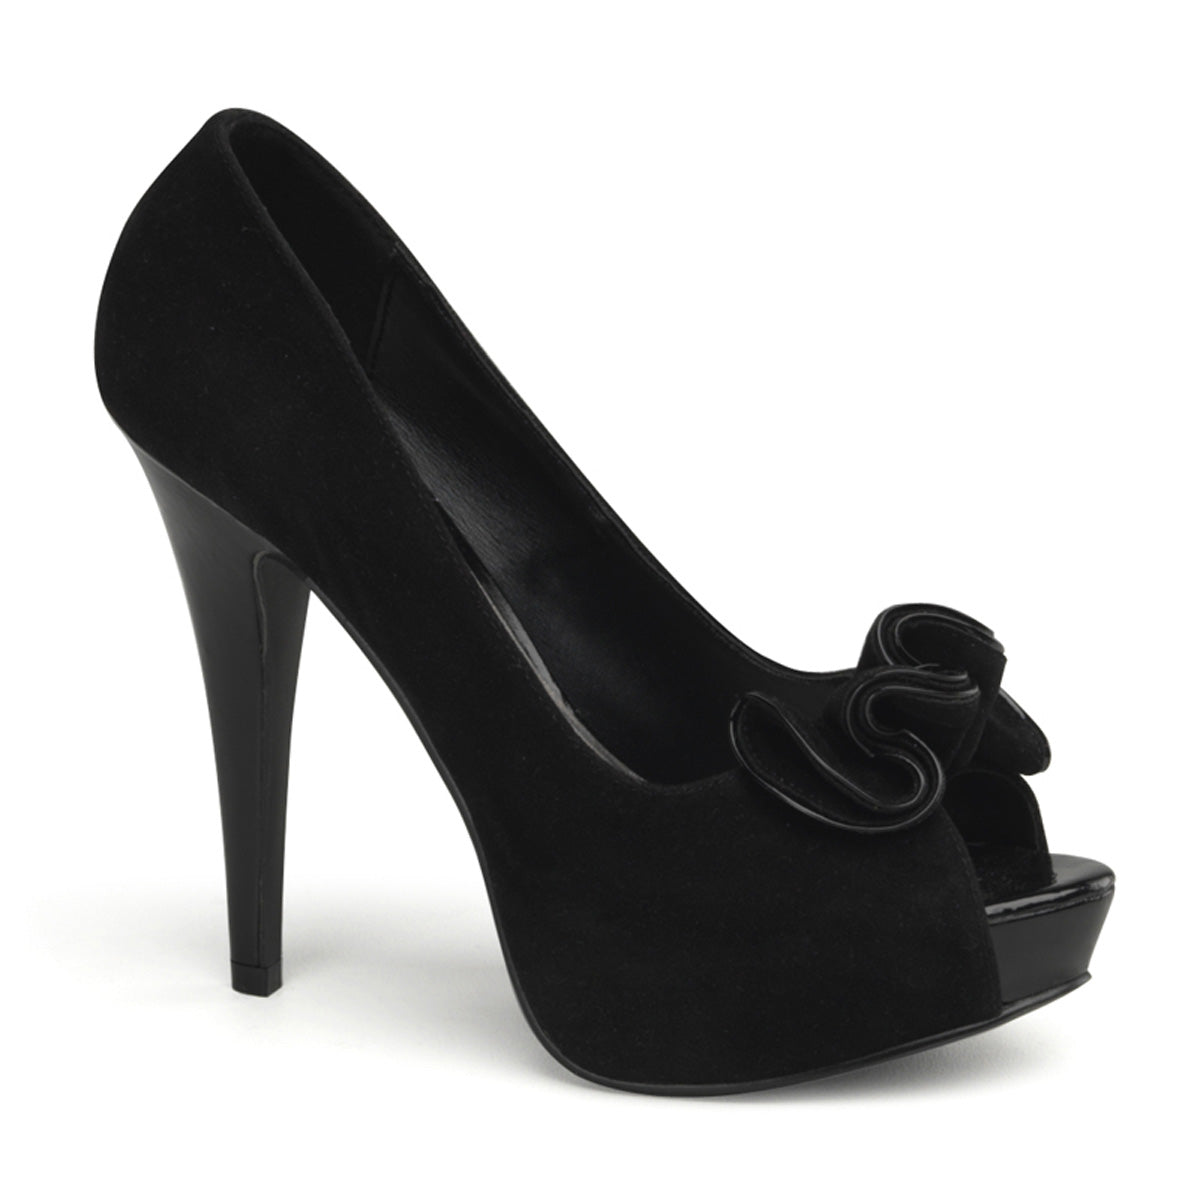 LOLITA-10 Pin Up 5" Heel Black Suede Pu Retro Pin Up Shoes-Pin Up Couture- Sexy Shoes